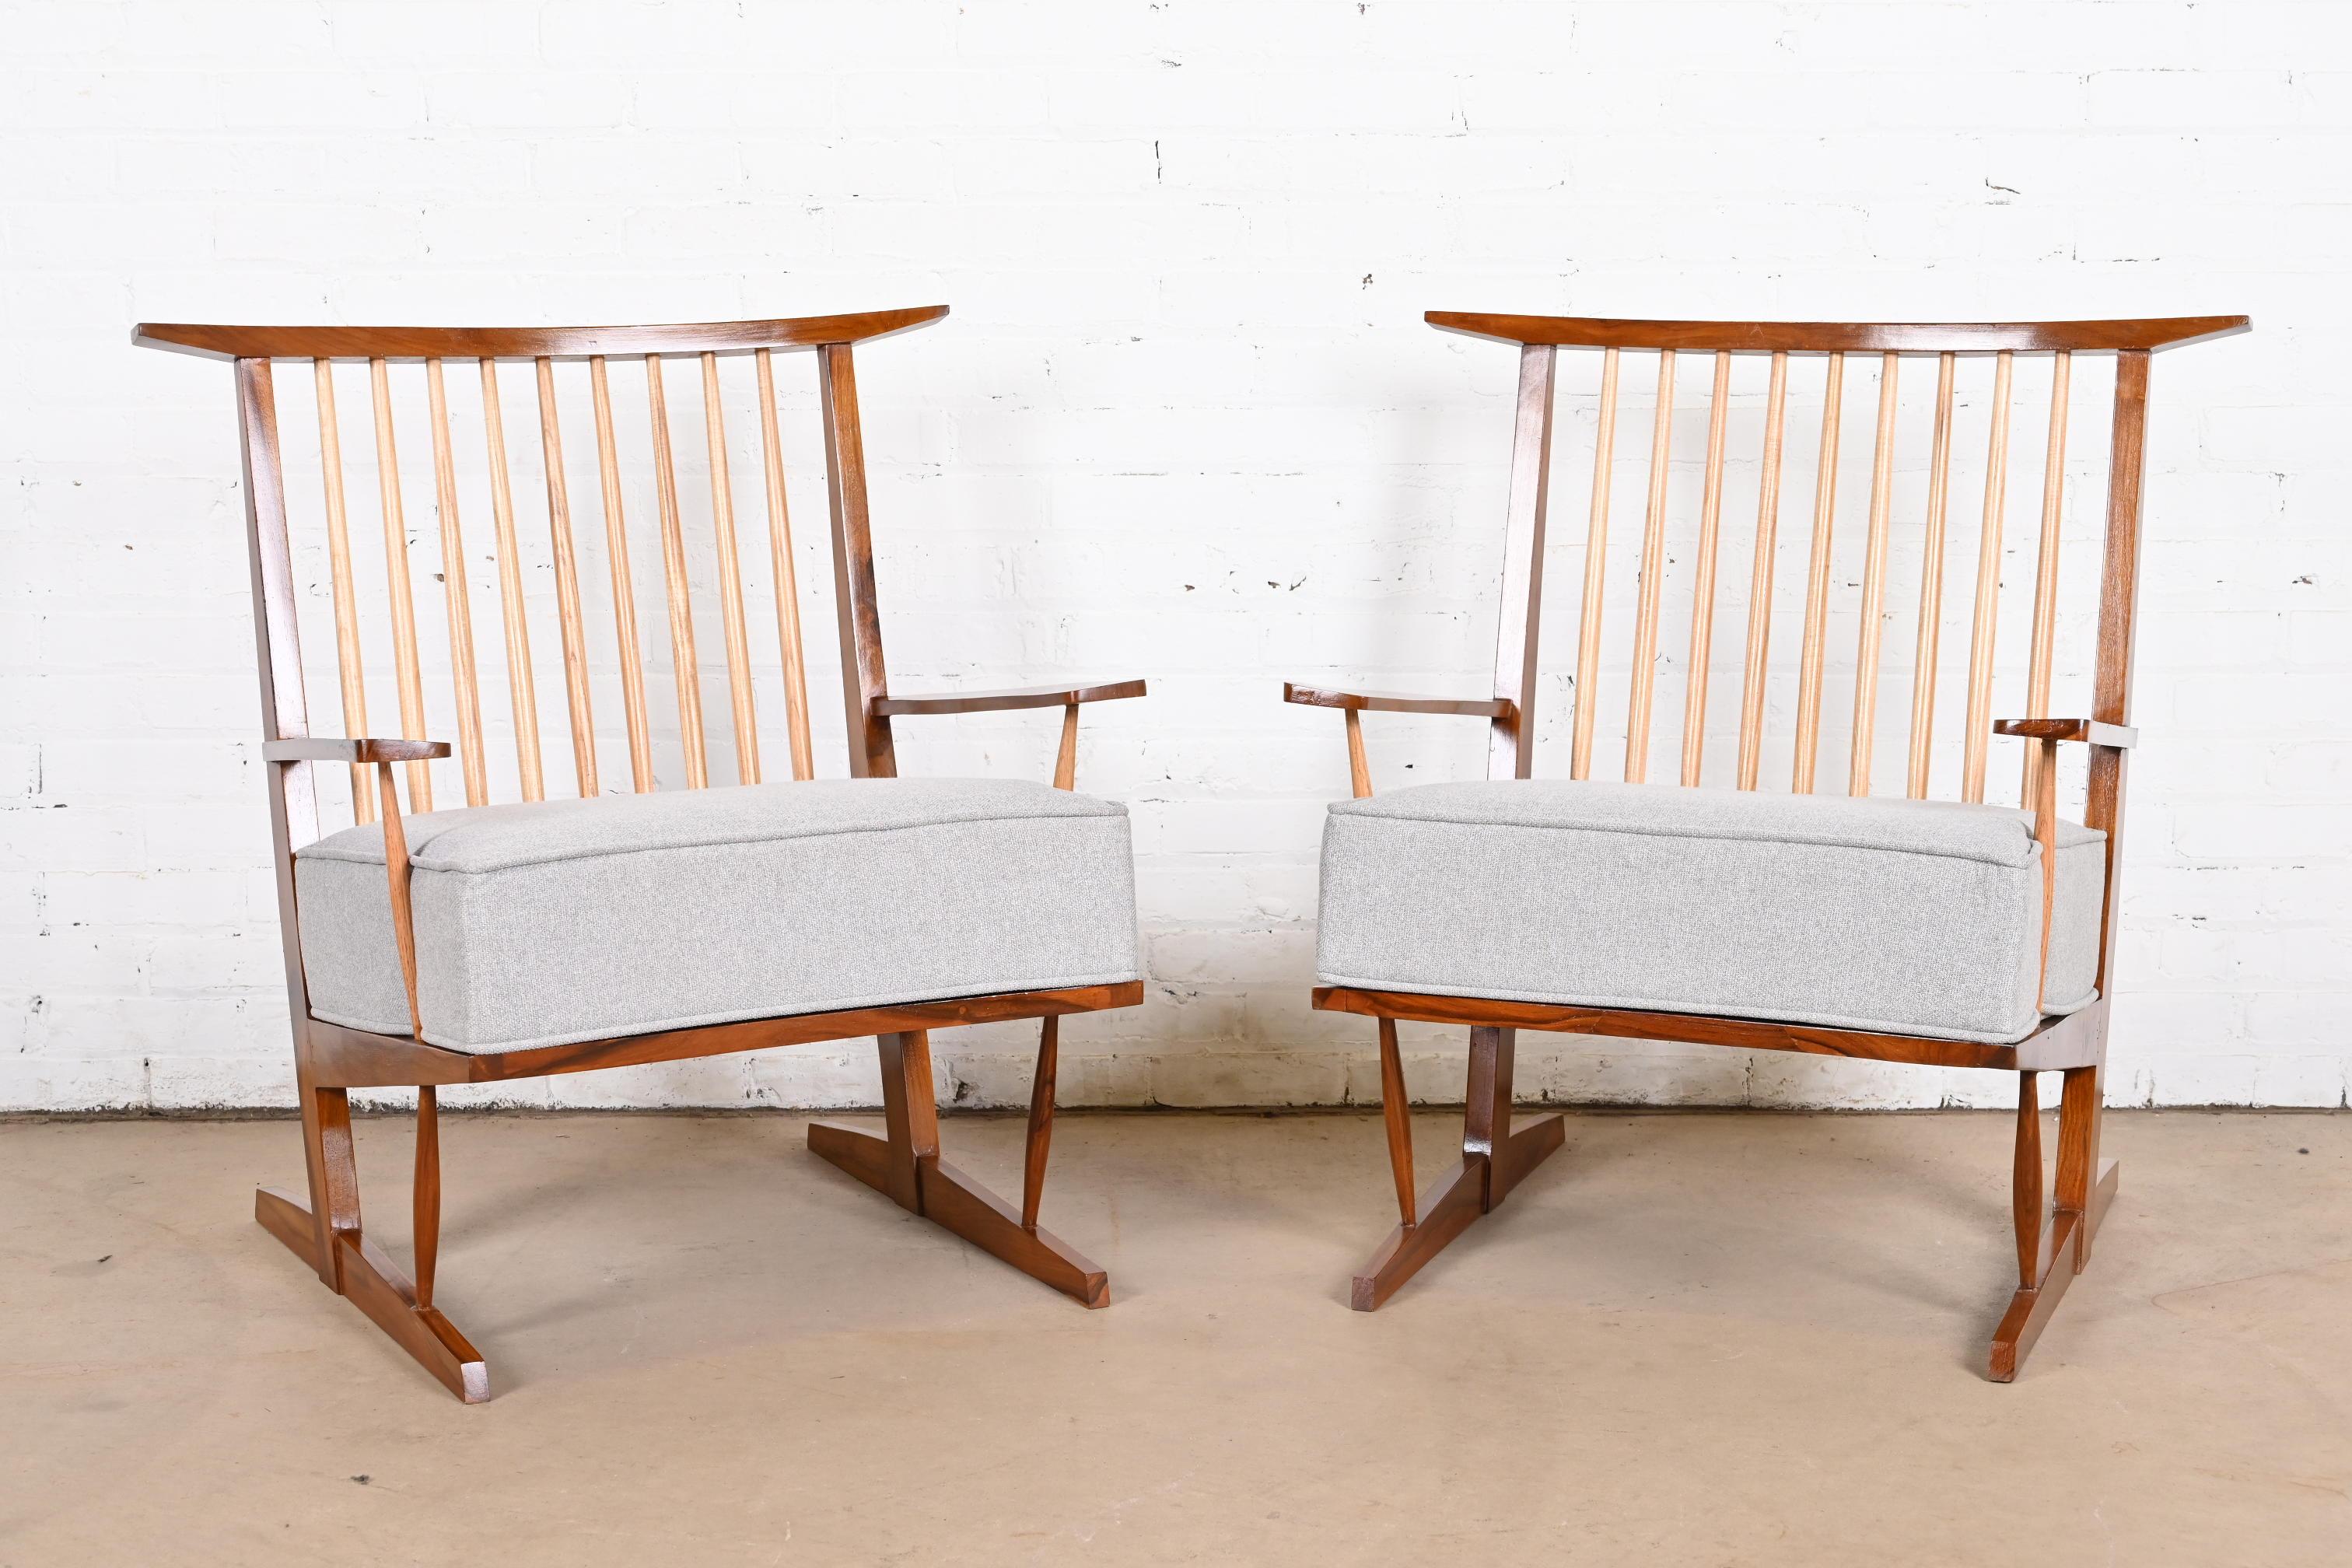 An exceptional pair of Organic Modern lounge chairs

After George Nakashima

USA, Circa Late 20th Century

Sculpted walnut frames, with contrasting hickory spindles, and removable upholstered seat cushions.

Measures: 30.75